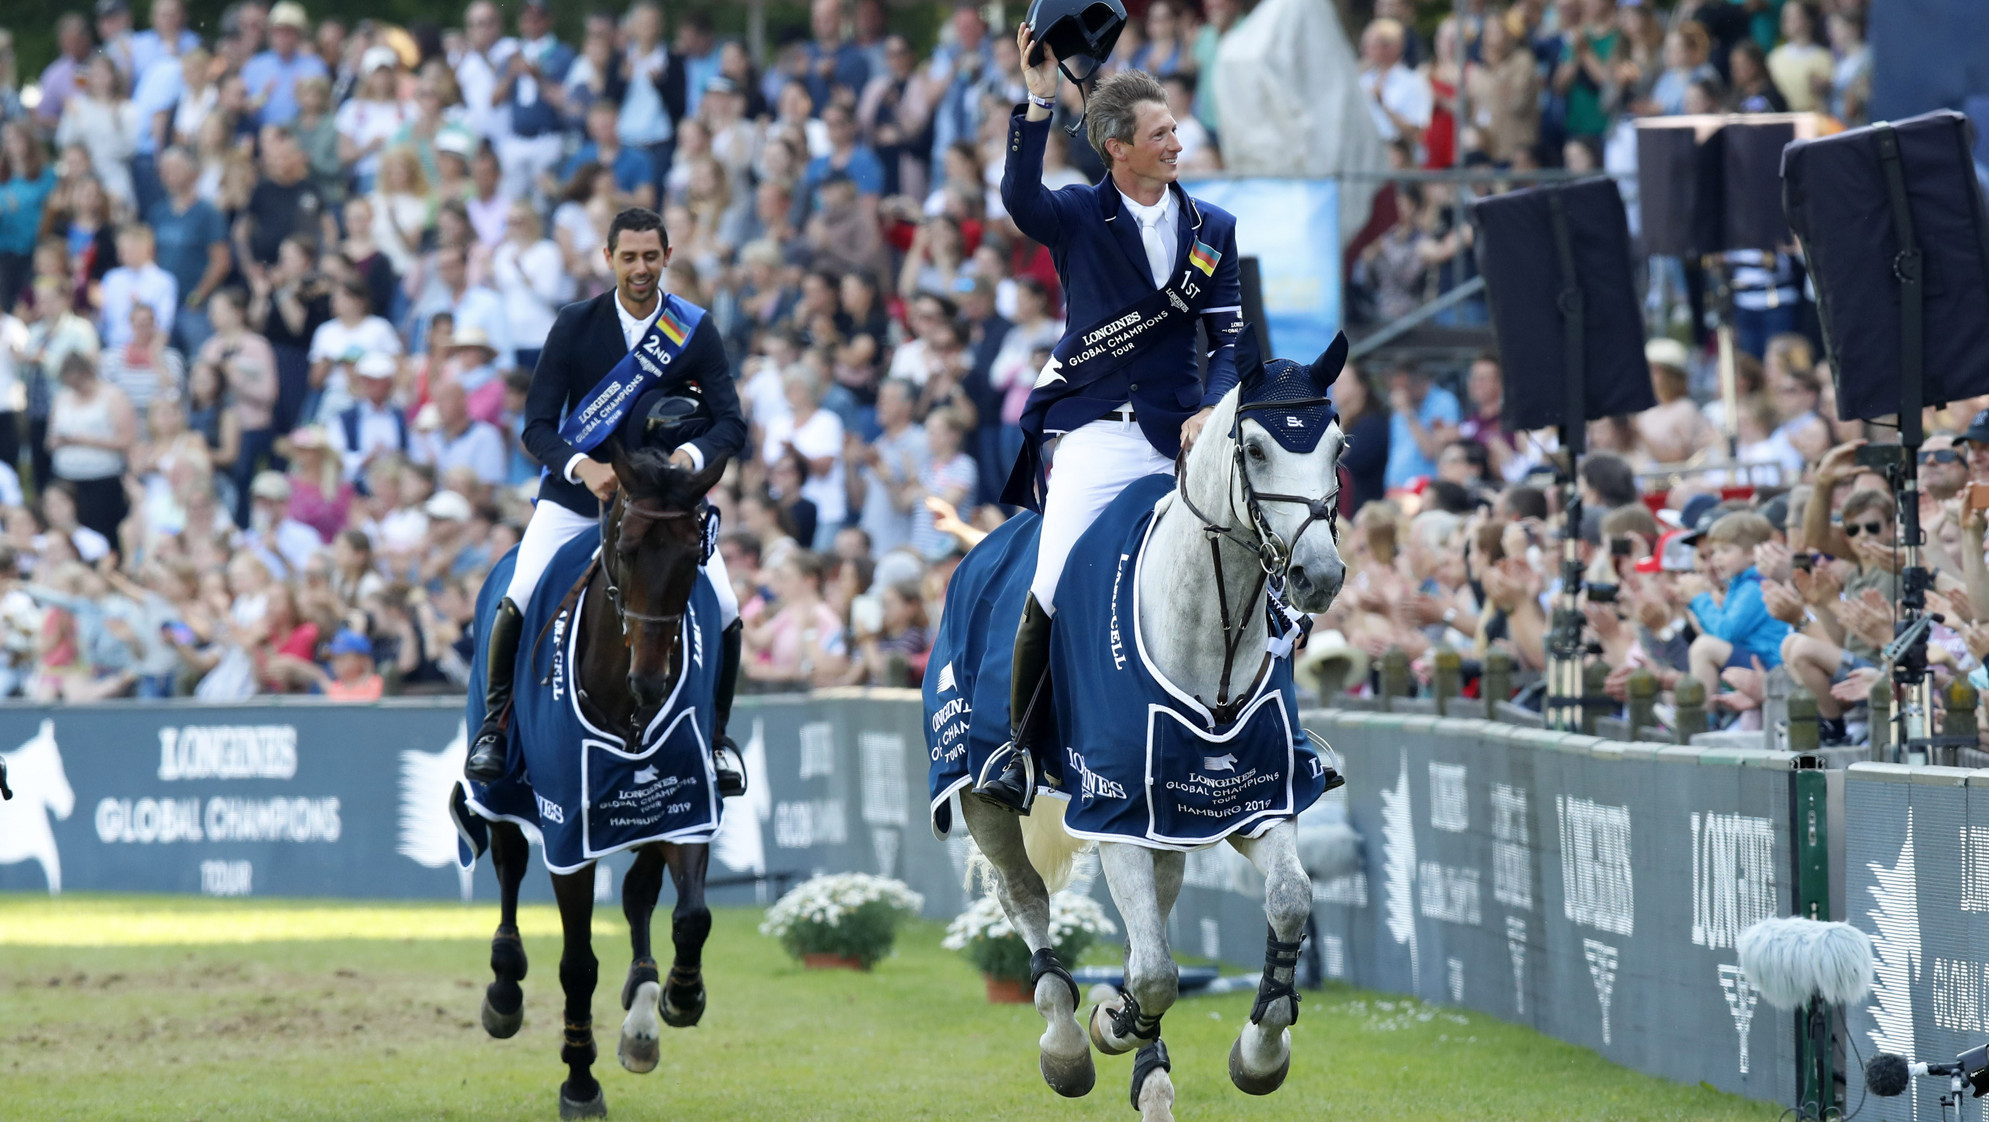 Germany's Daniel Deusser took a rankings lead at the Longines Global Champions Tour event in Hamburg ©LGCT